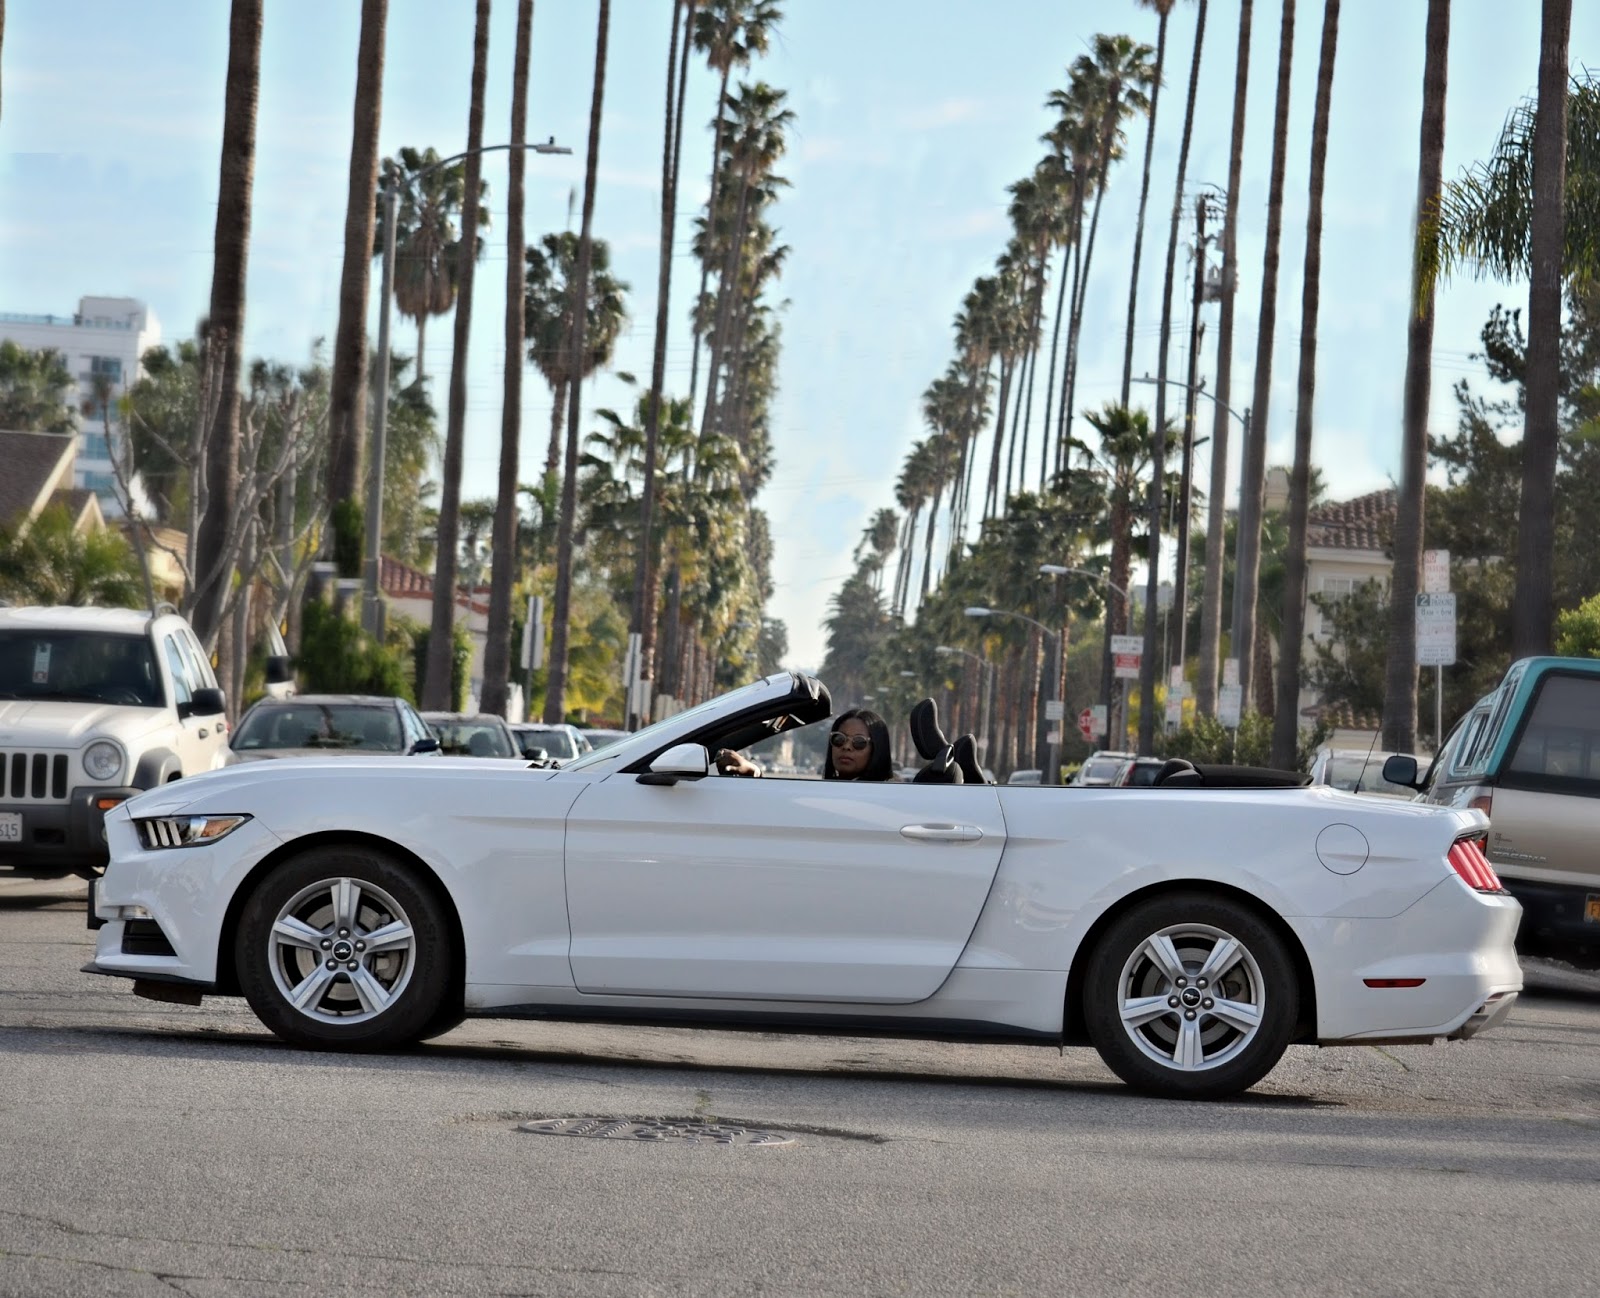 Los Angeles Palms Lined Street in A Convertible Mustang Listening To Mary J. Blige